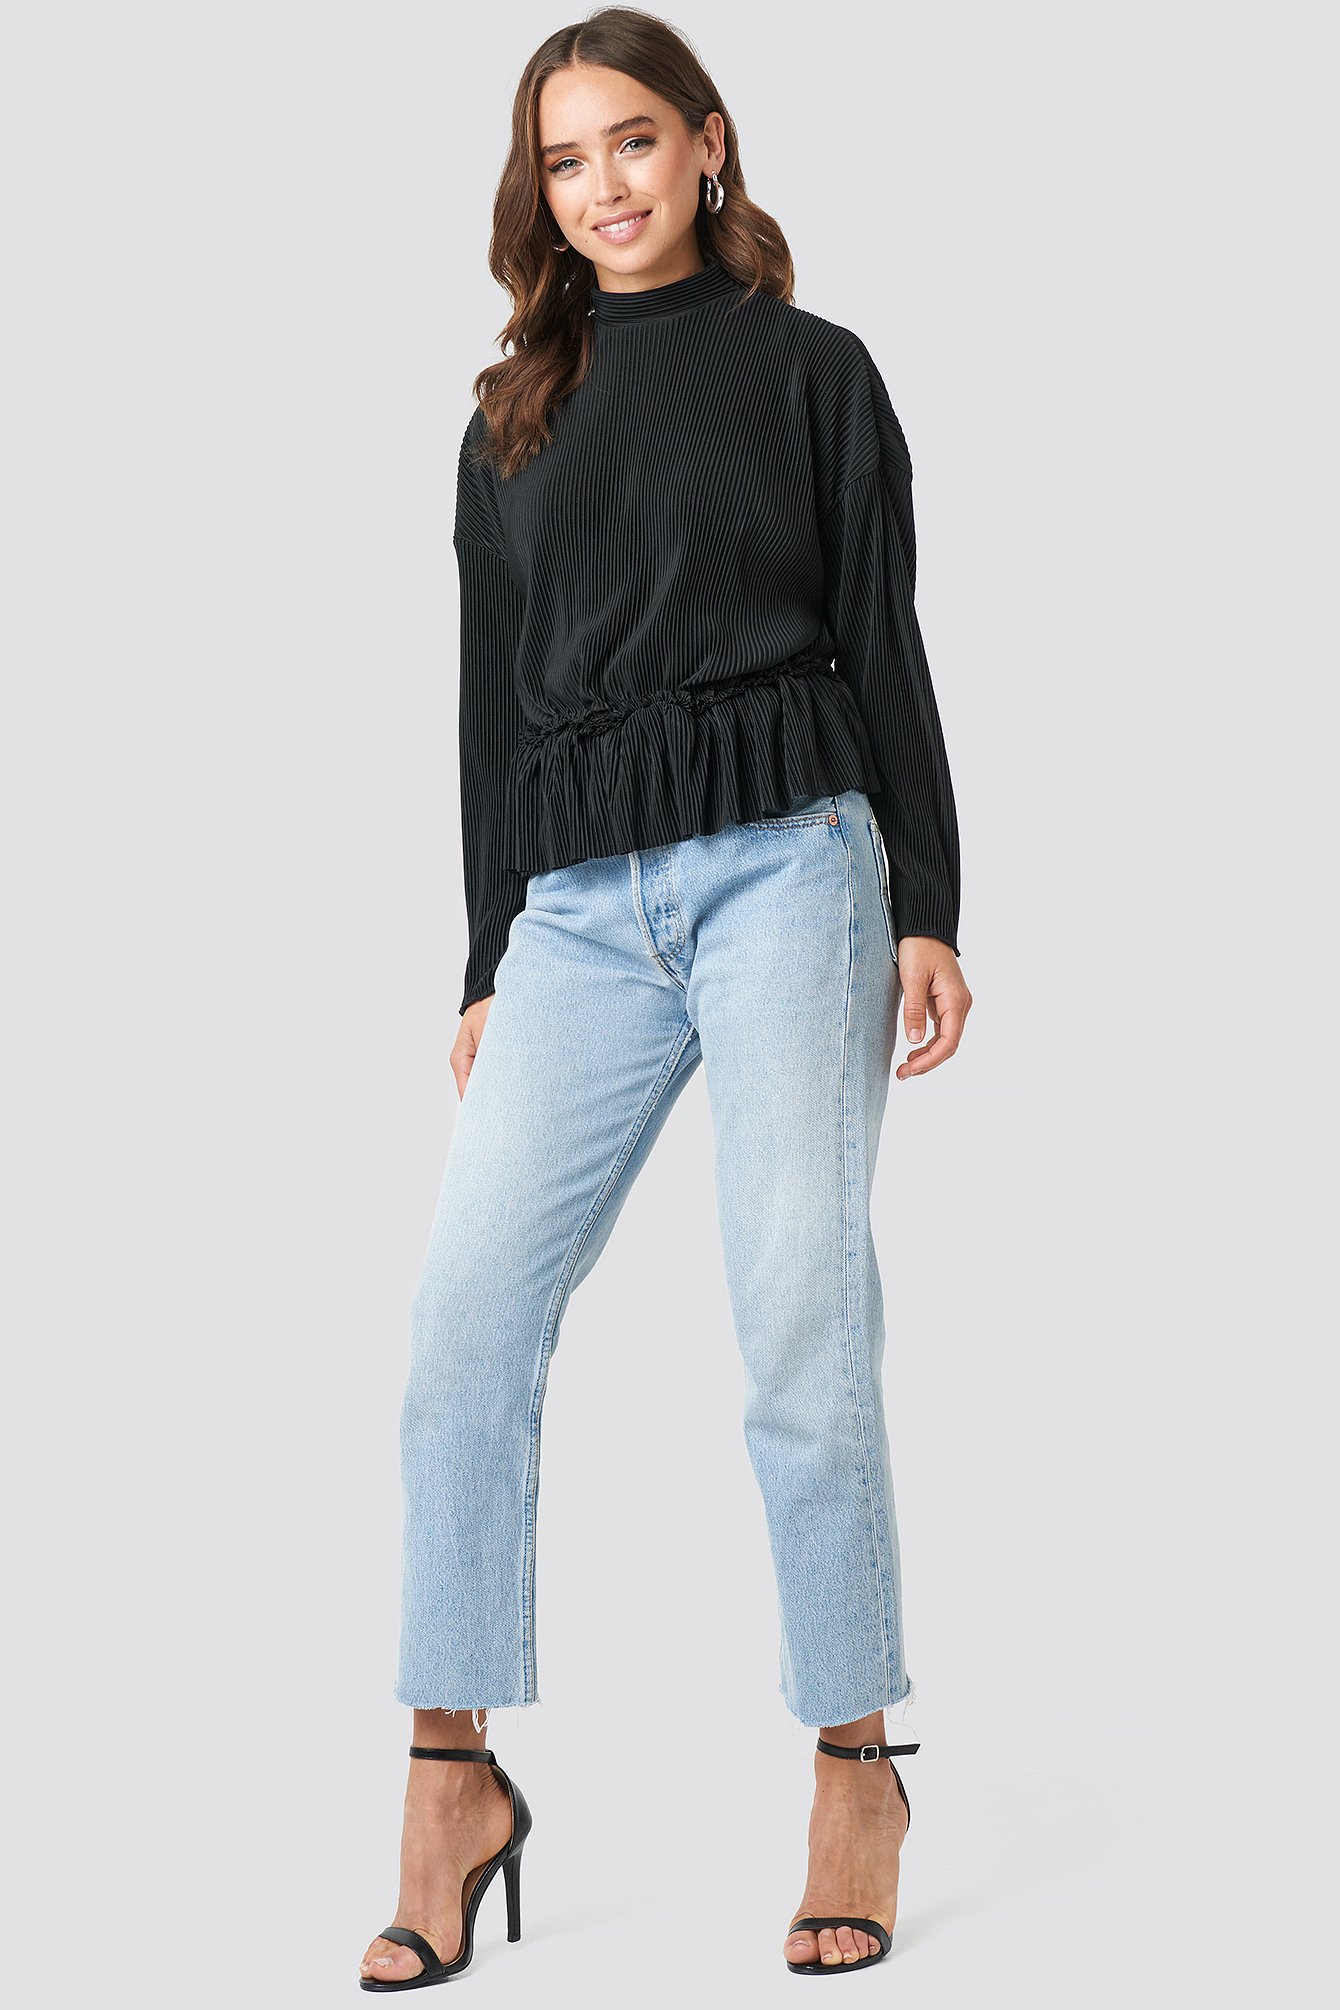 Pleated High Neck Long Sleeve Top Outfit.